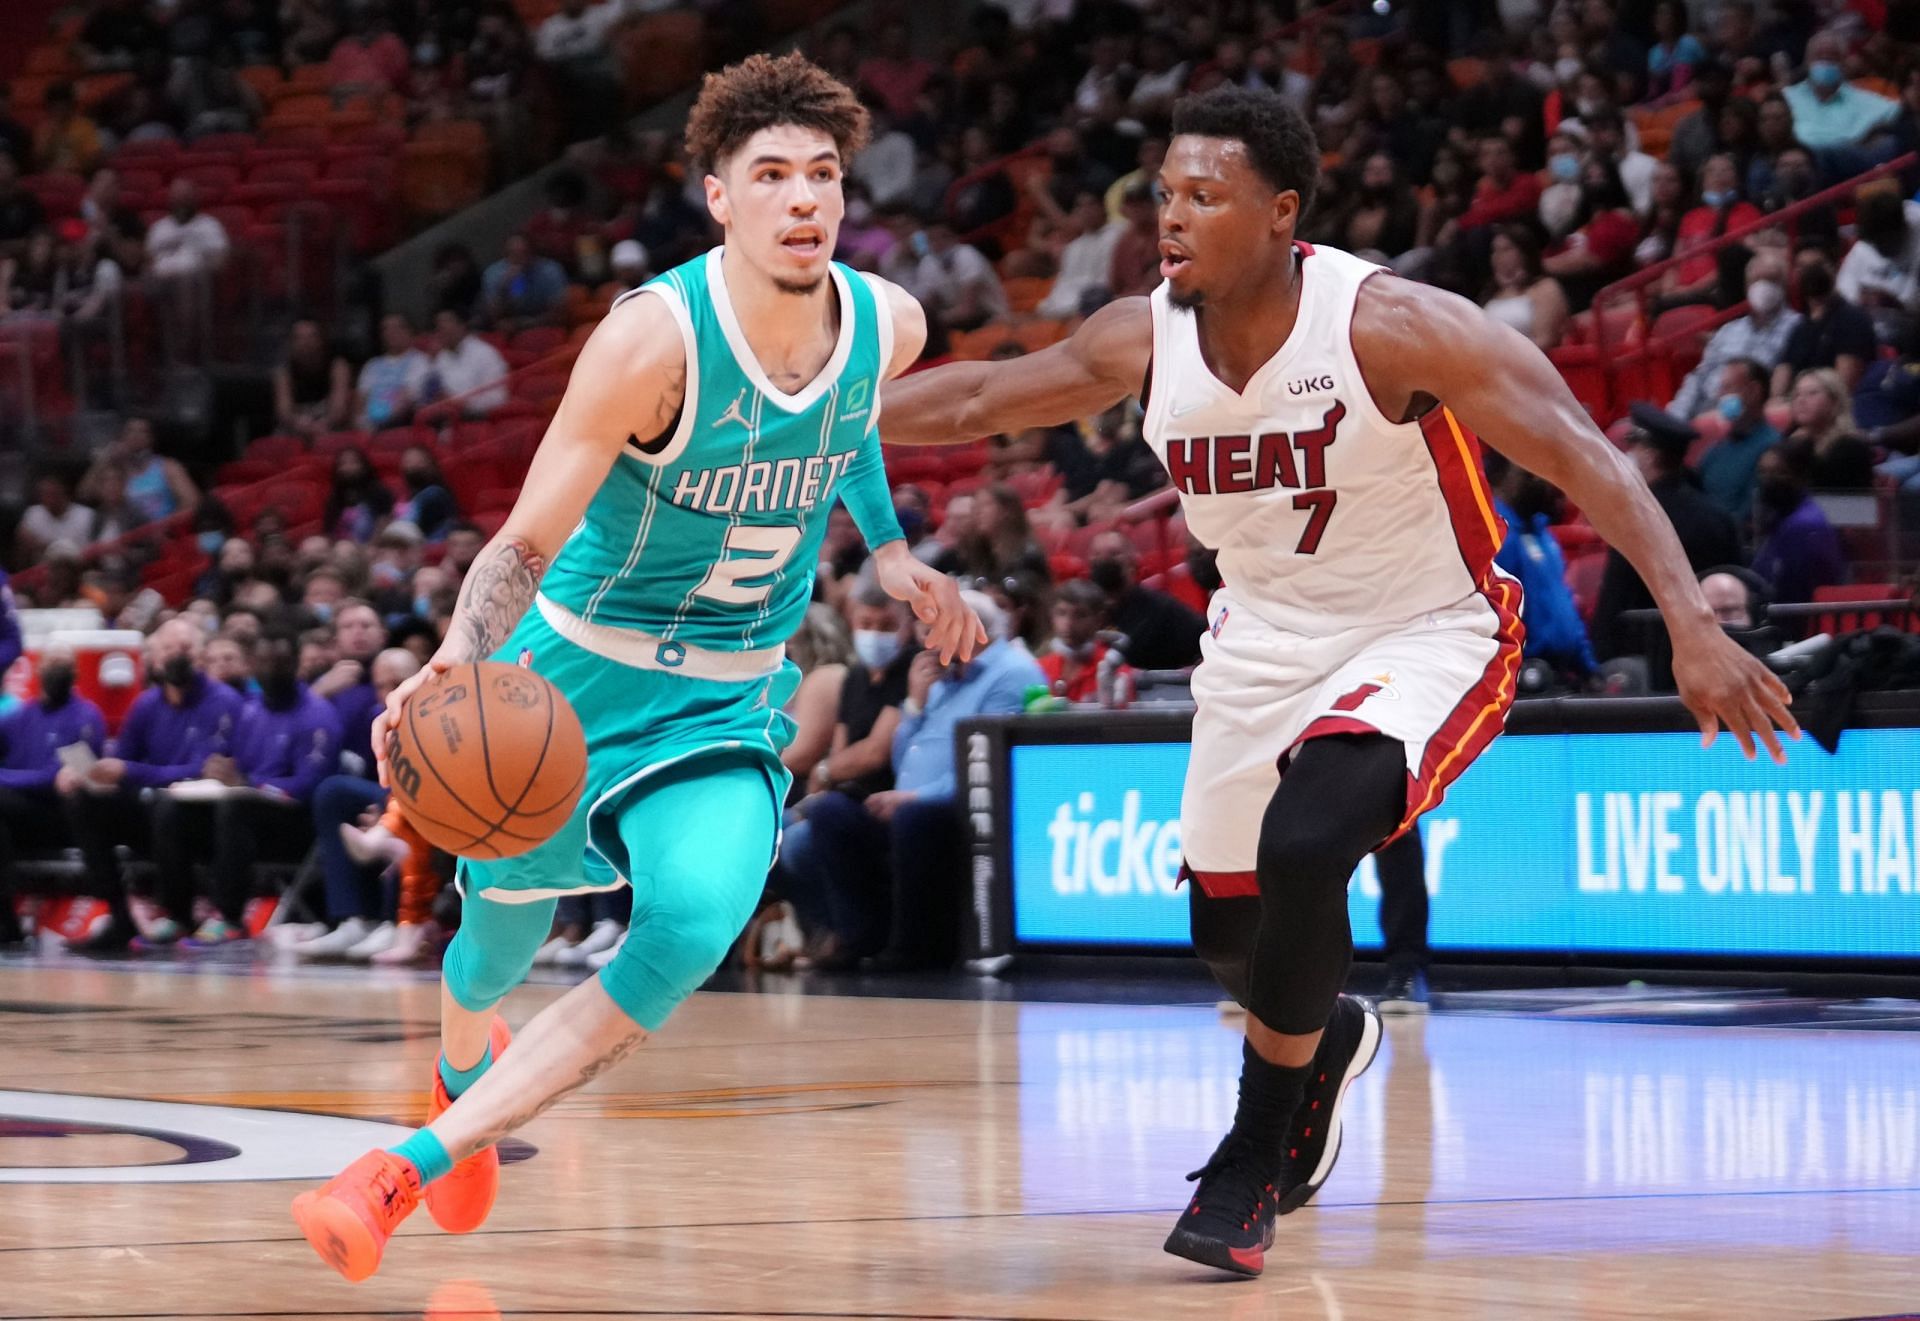 The Miami Heat will face the Charlotte Hornets for the second time this season [Photo: All U Can Heat]